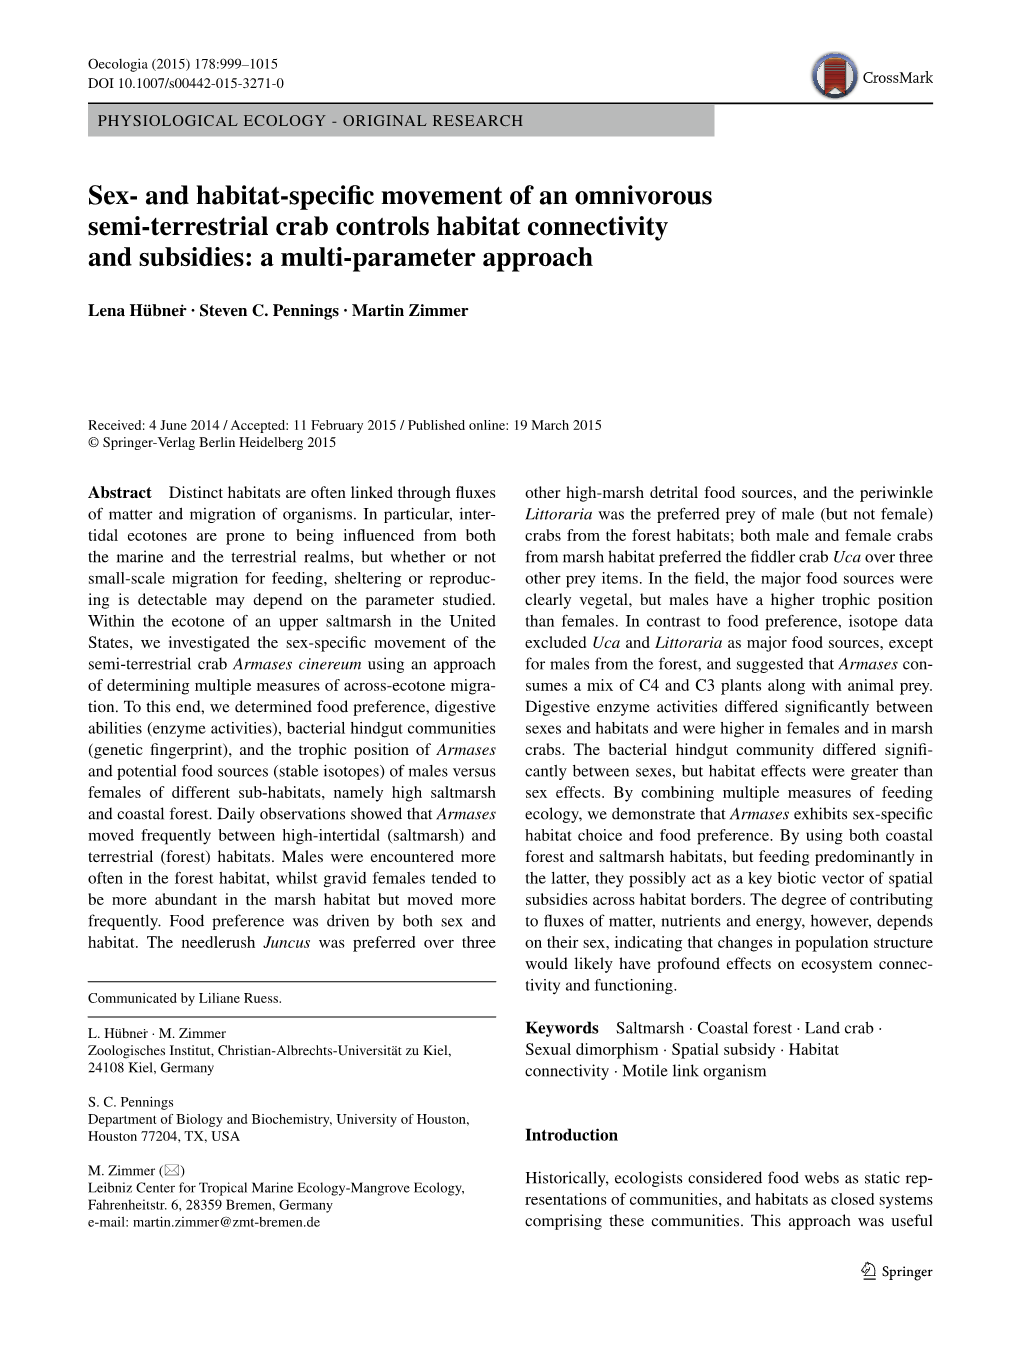 Sex- and Habitat-Specific Movement of An